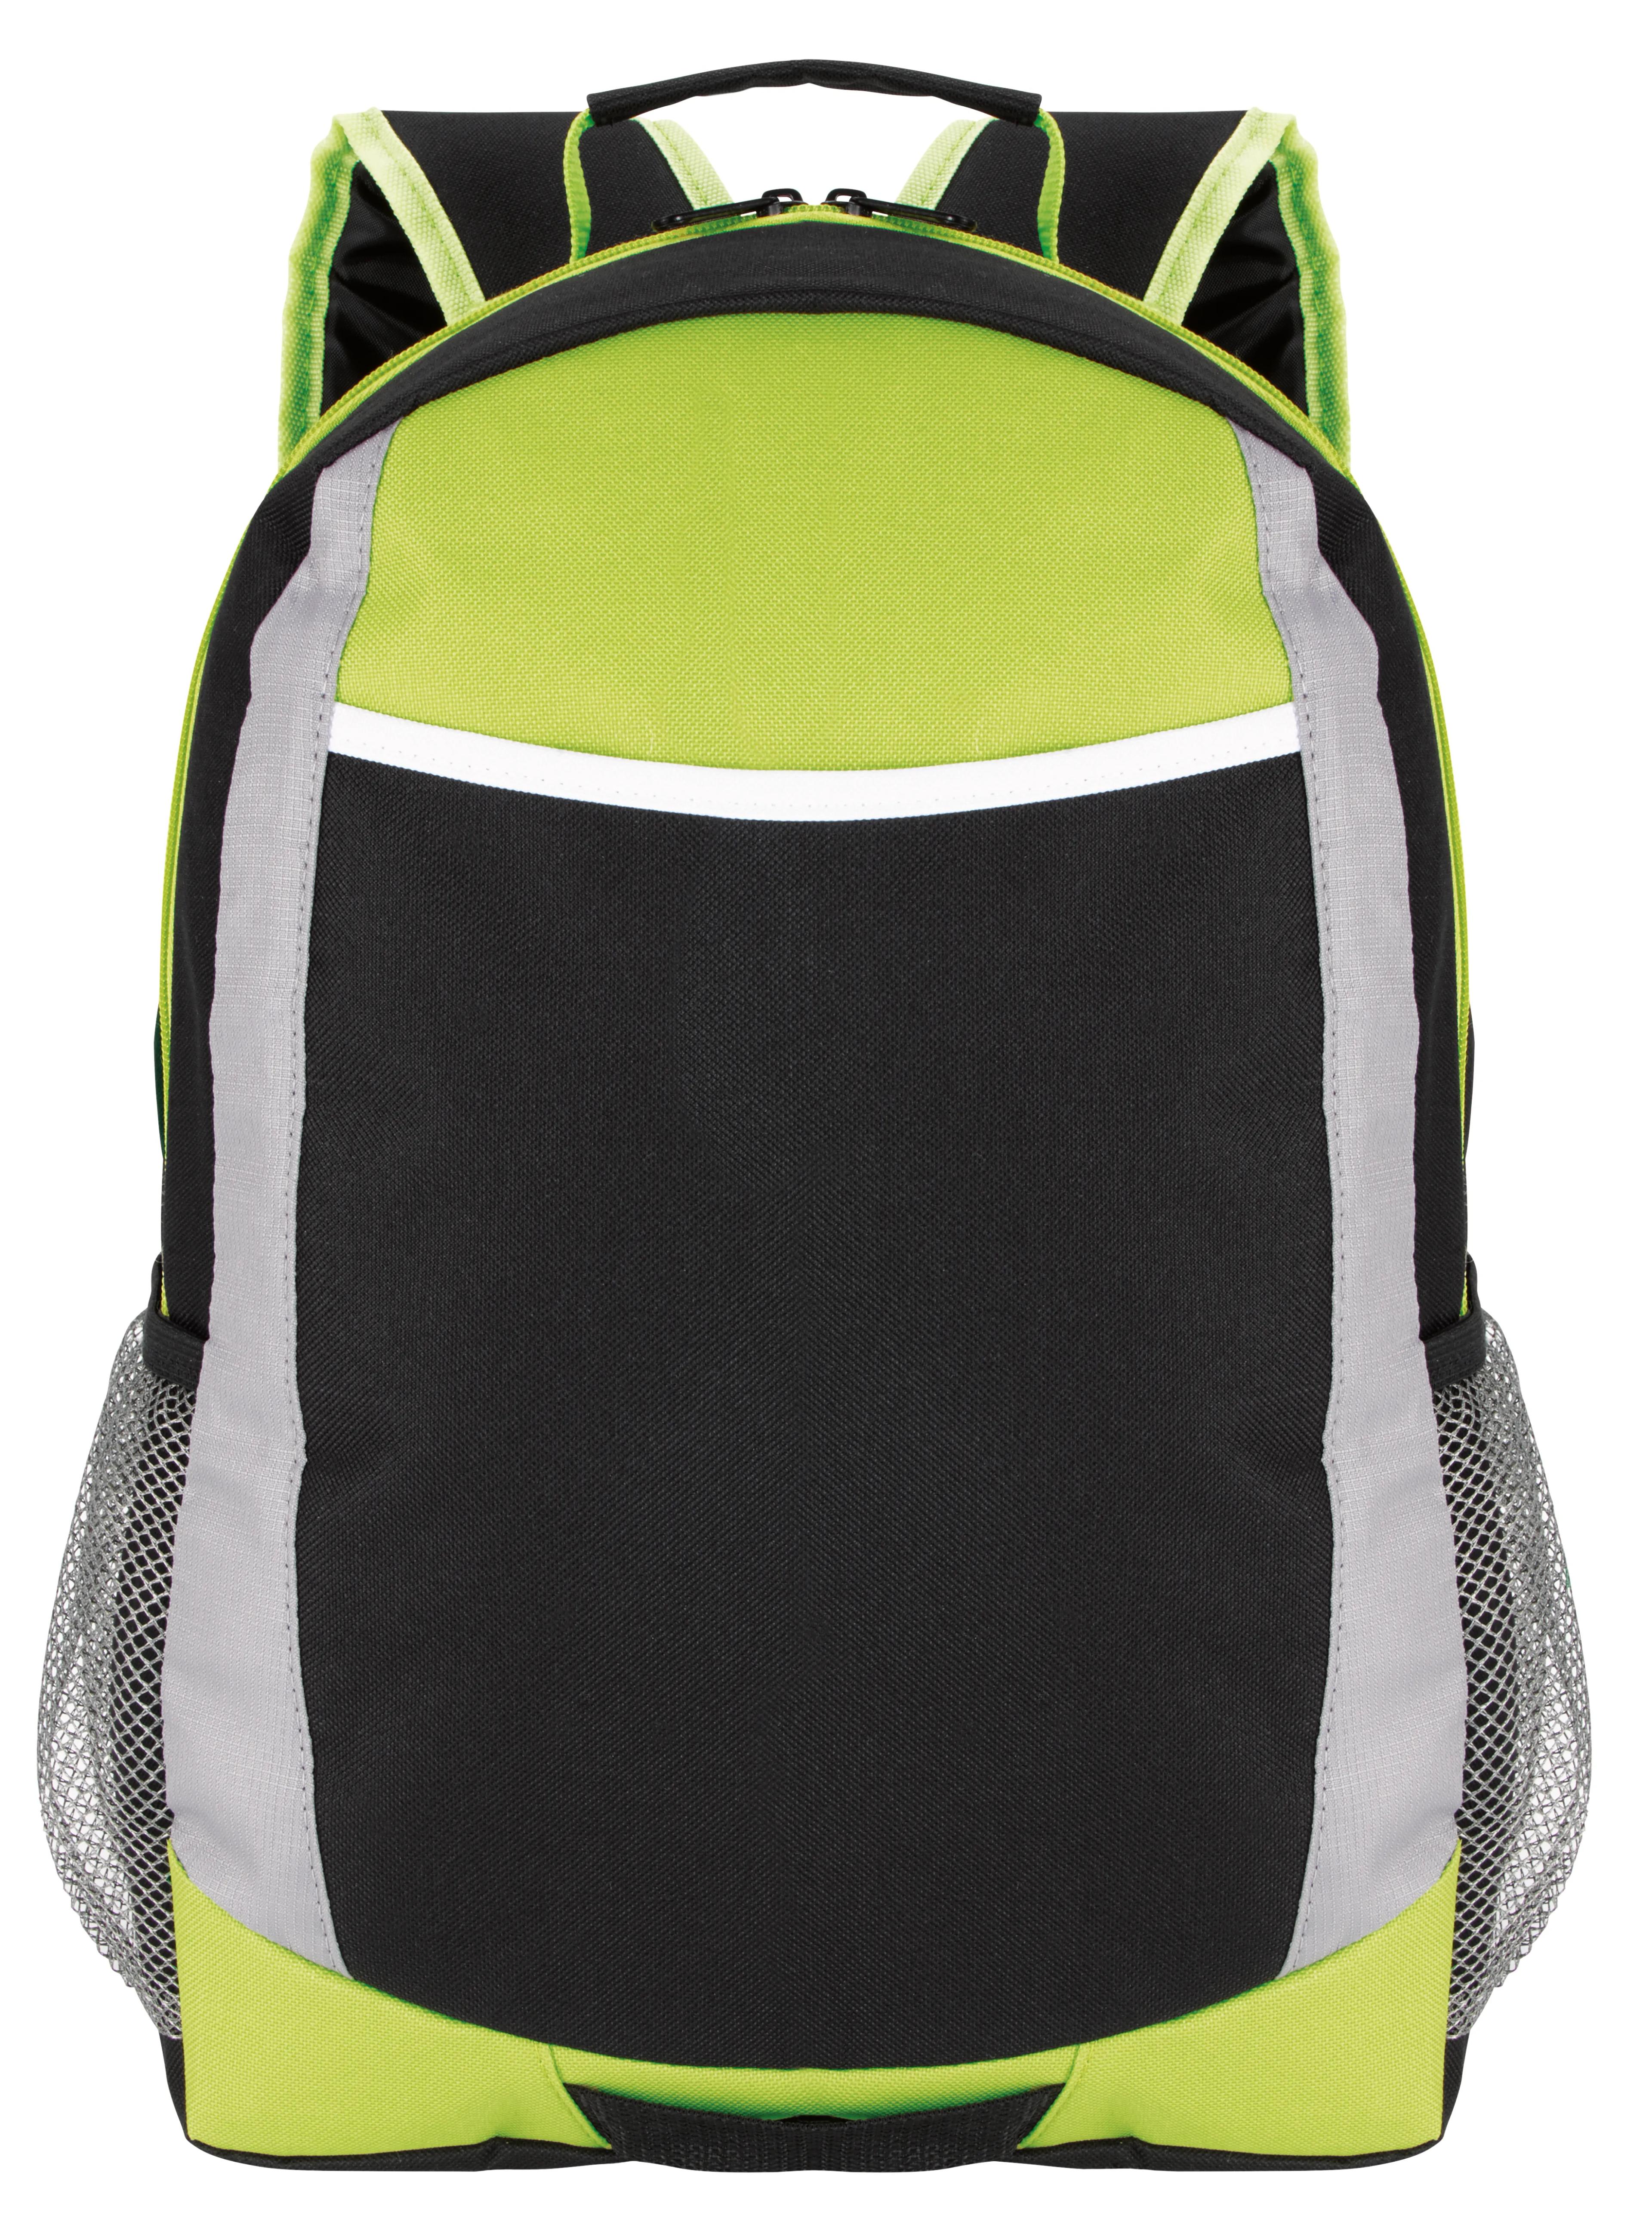 Primary Sport Backpack 1 of 14